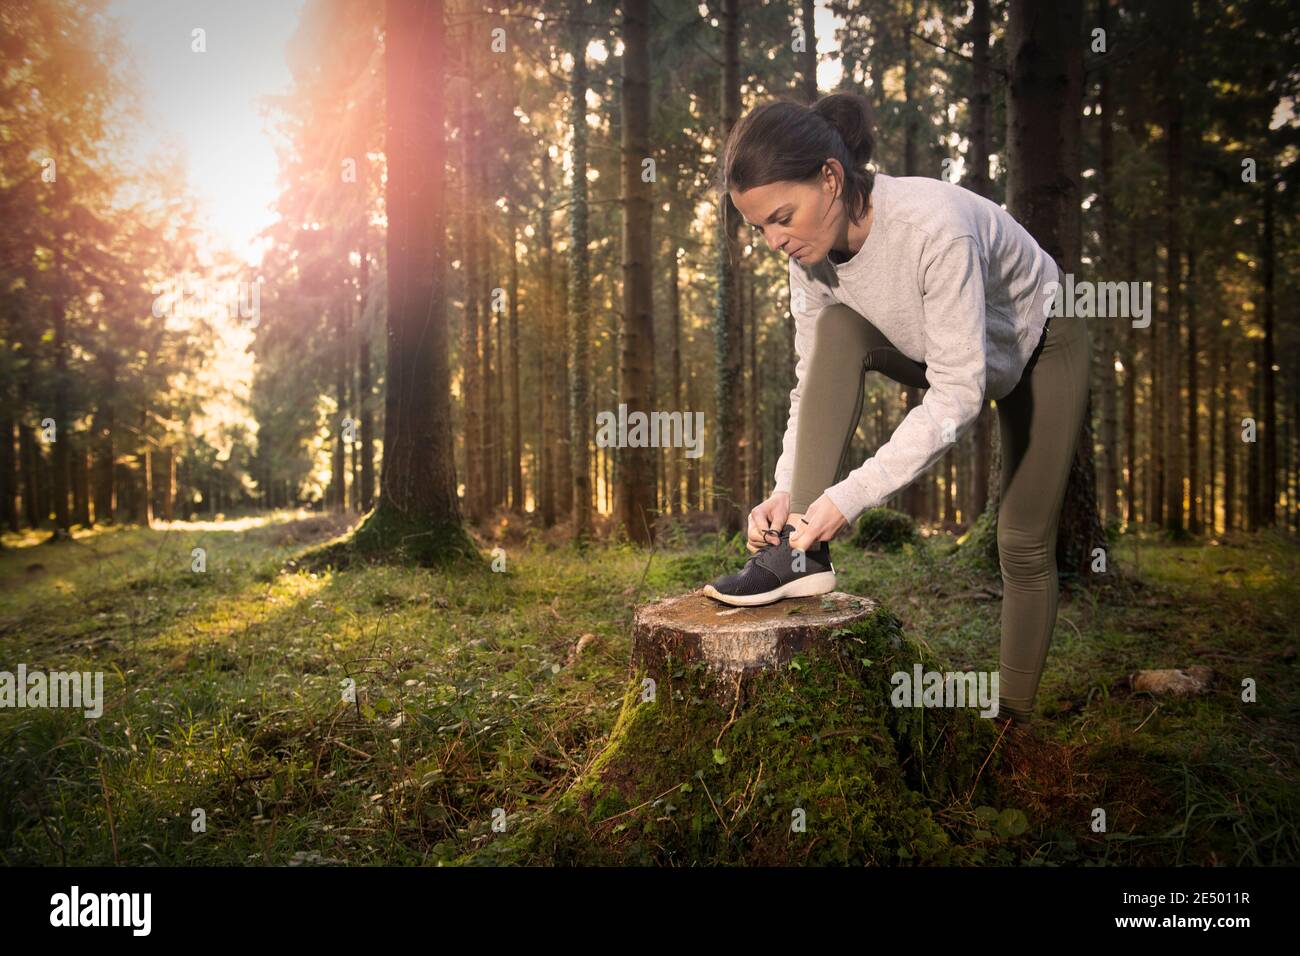 Female runner tying her shoelaces, ready to run through a forest, early moring run. Stock Photo